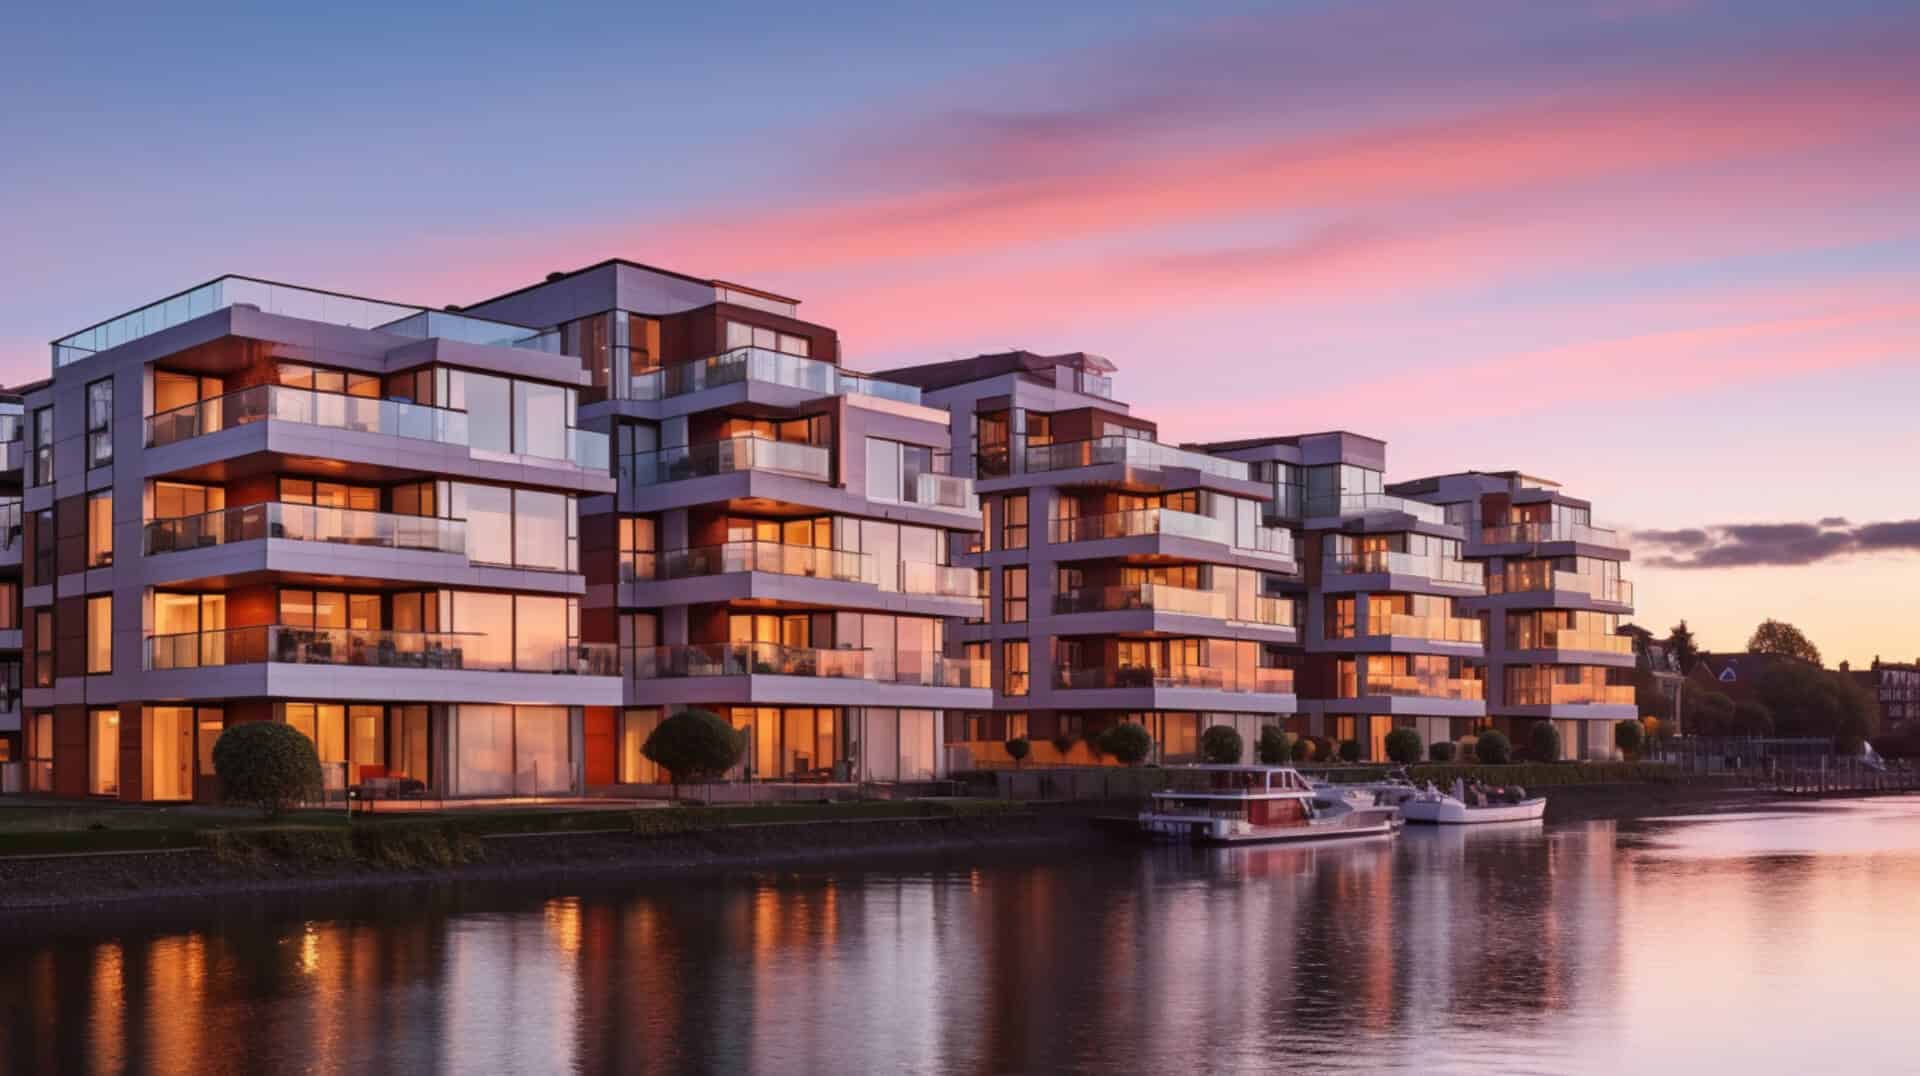 001 vibrant putney flats at sunset with sold sign 0 0